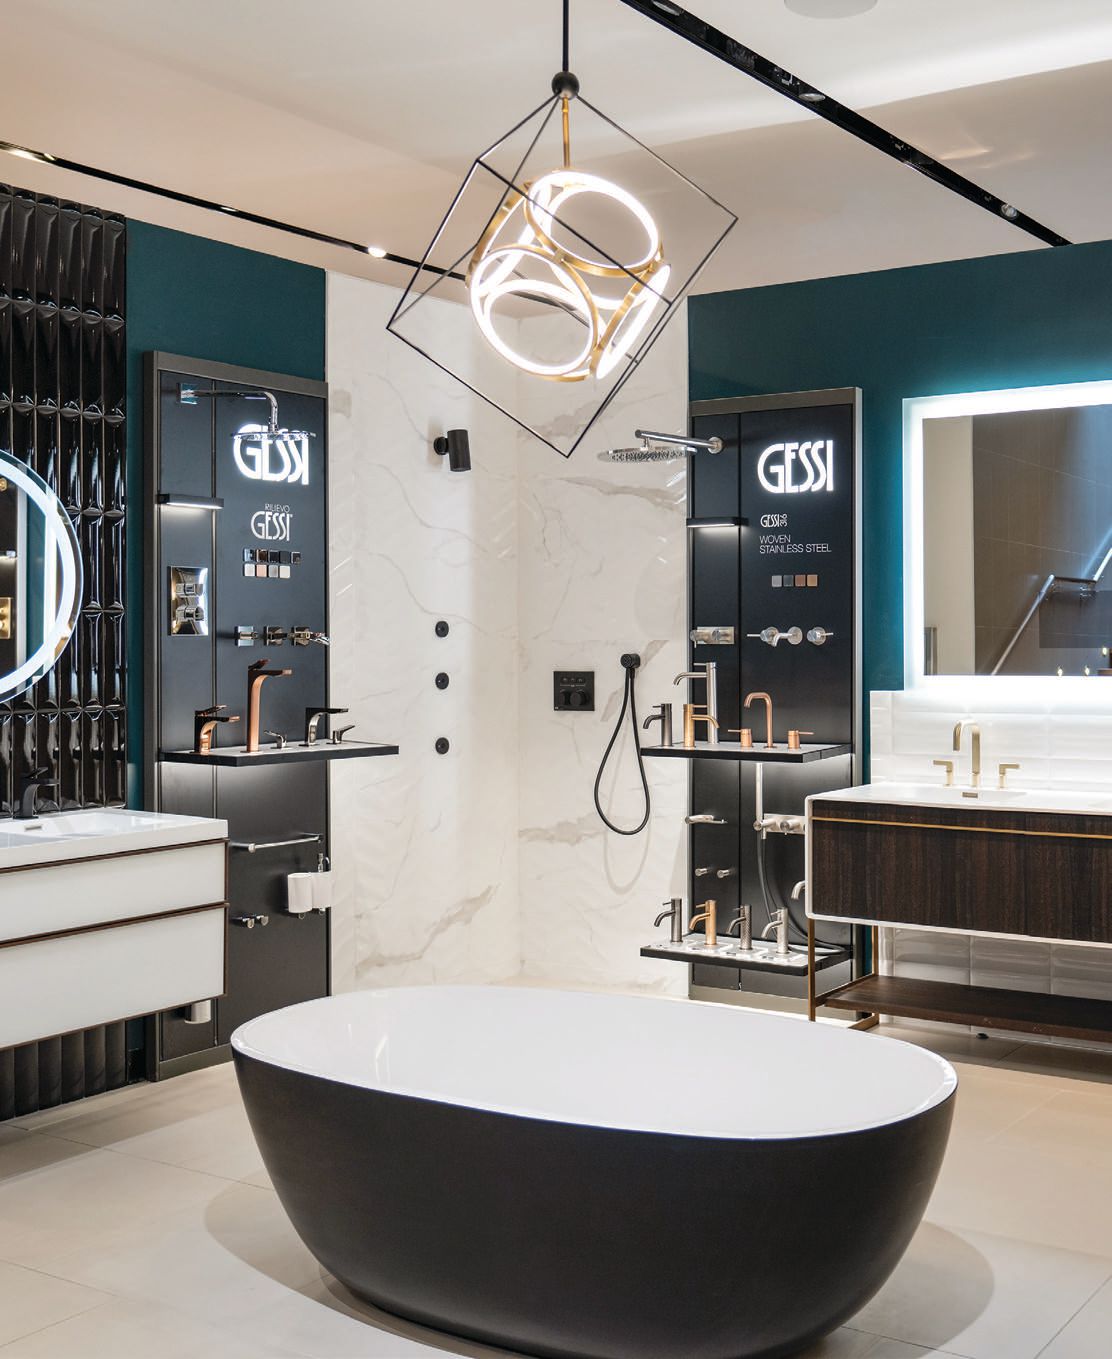 The Gessi display at Pirch. PHOTO: COURTESY OF PIRCH